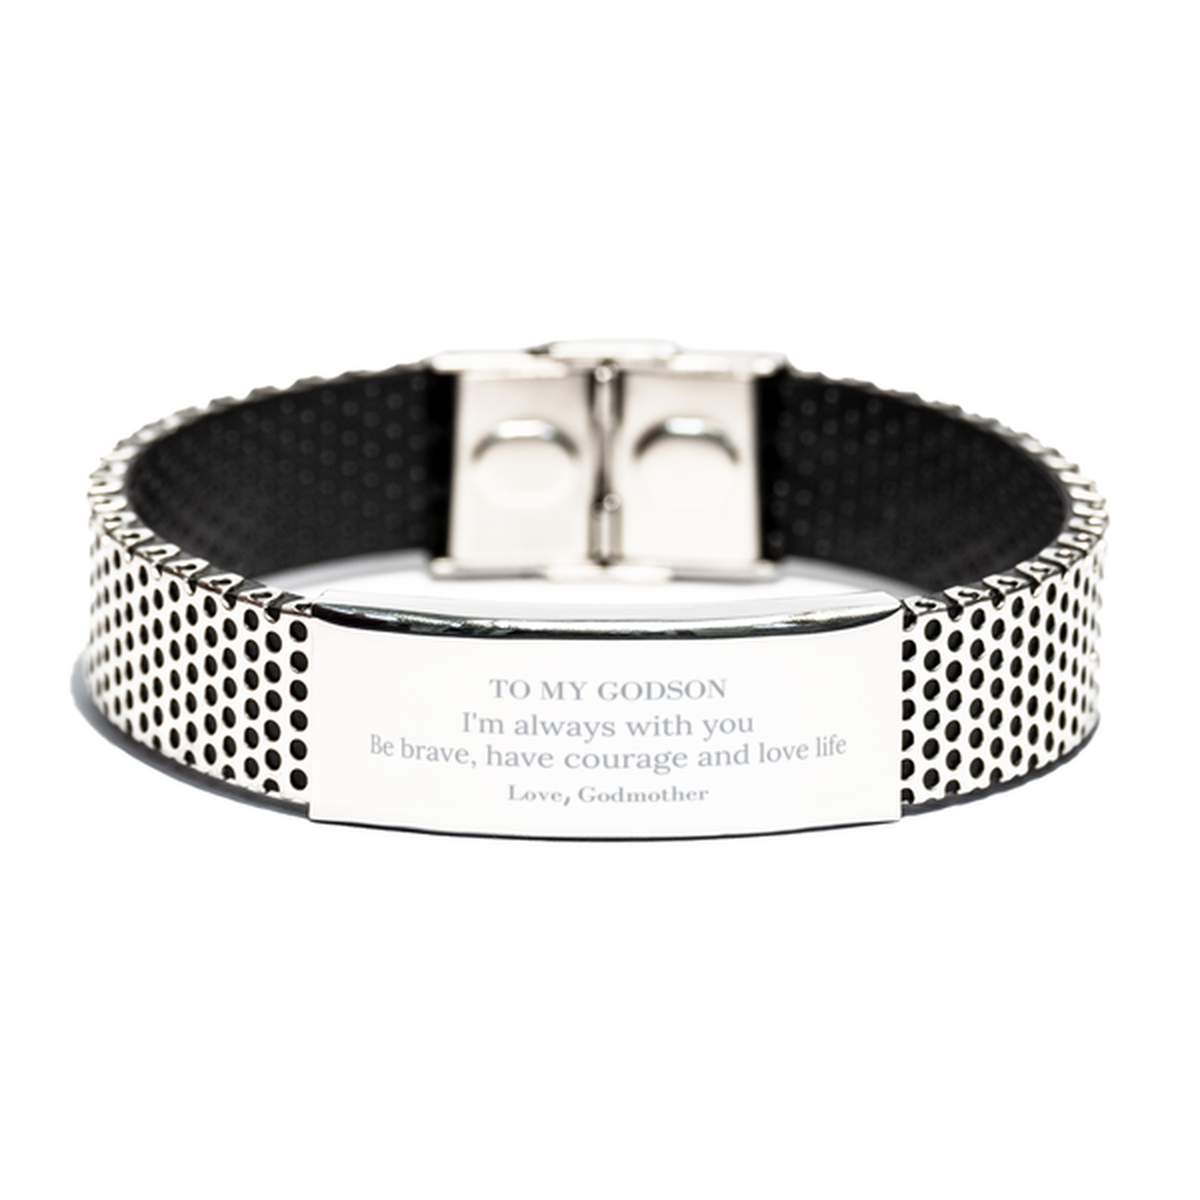 To My Godson Gifts from Godmother, Unique Stainless Steel Bracelet Inspirational Christmas Birthday Graduation Gifts for Godson I'm always with you. Be brave, have courage and love life. Love, Godmother